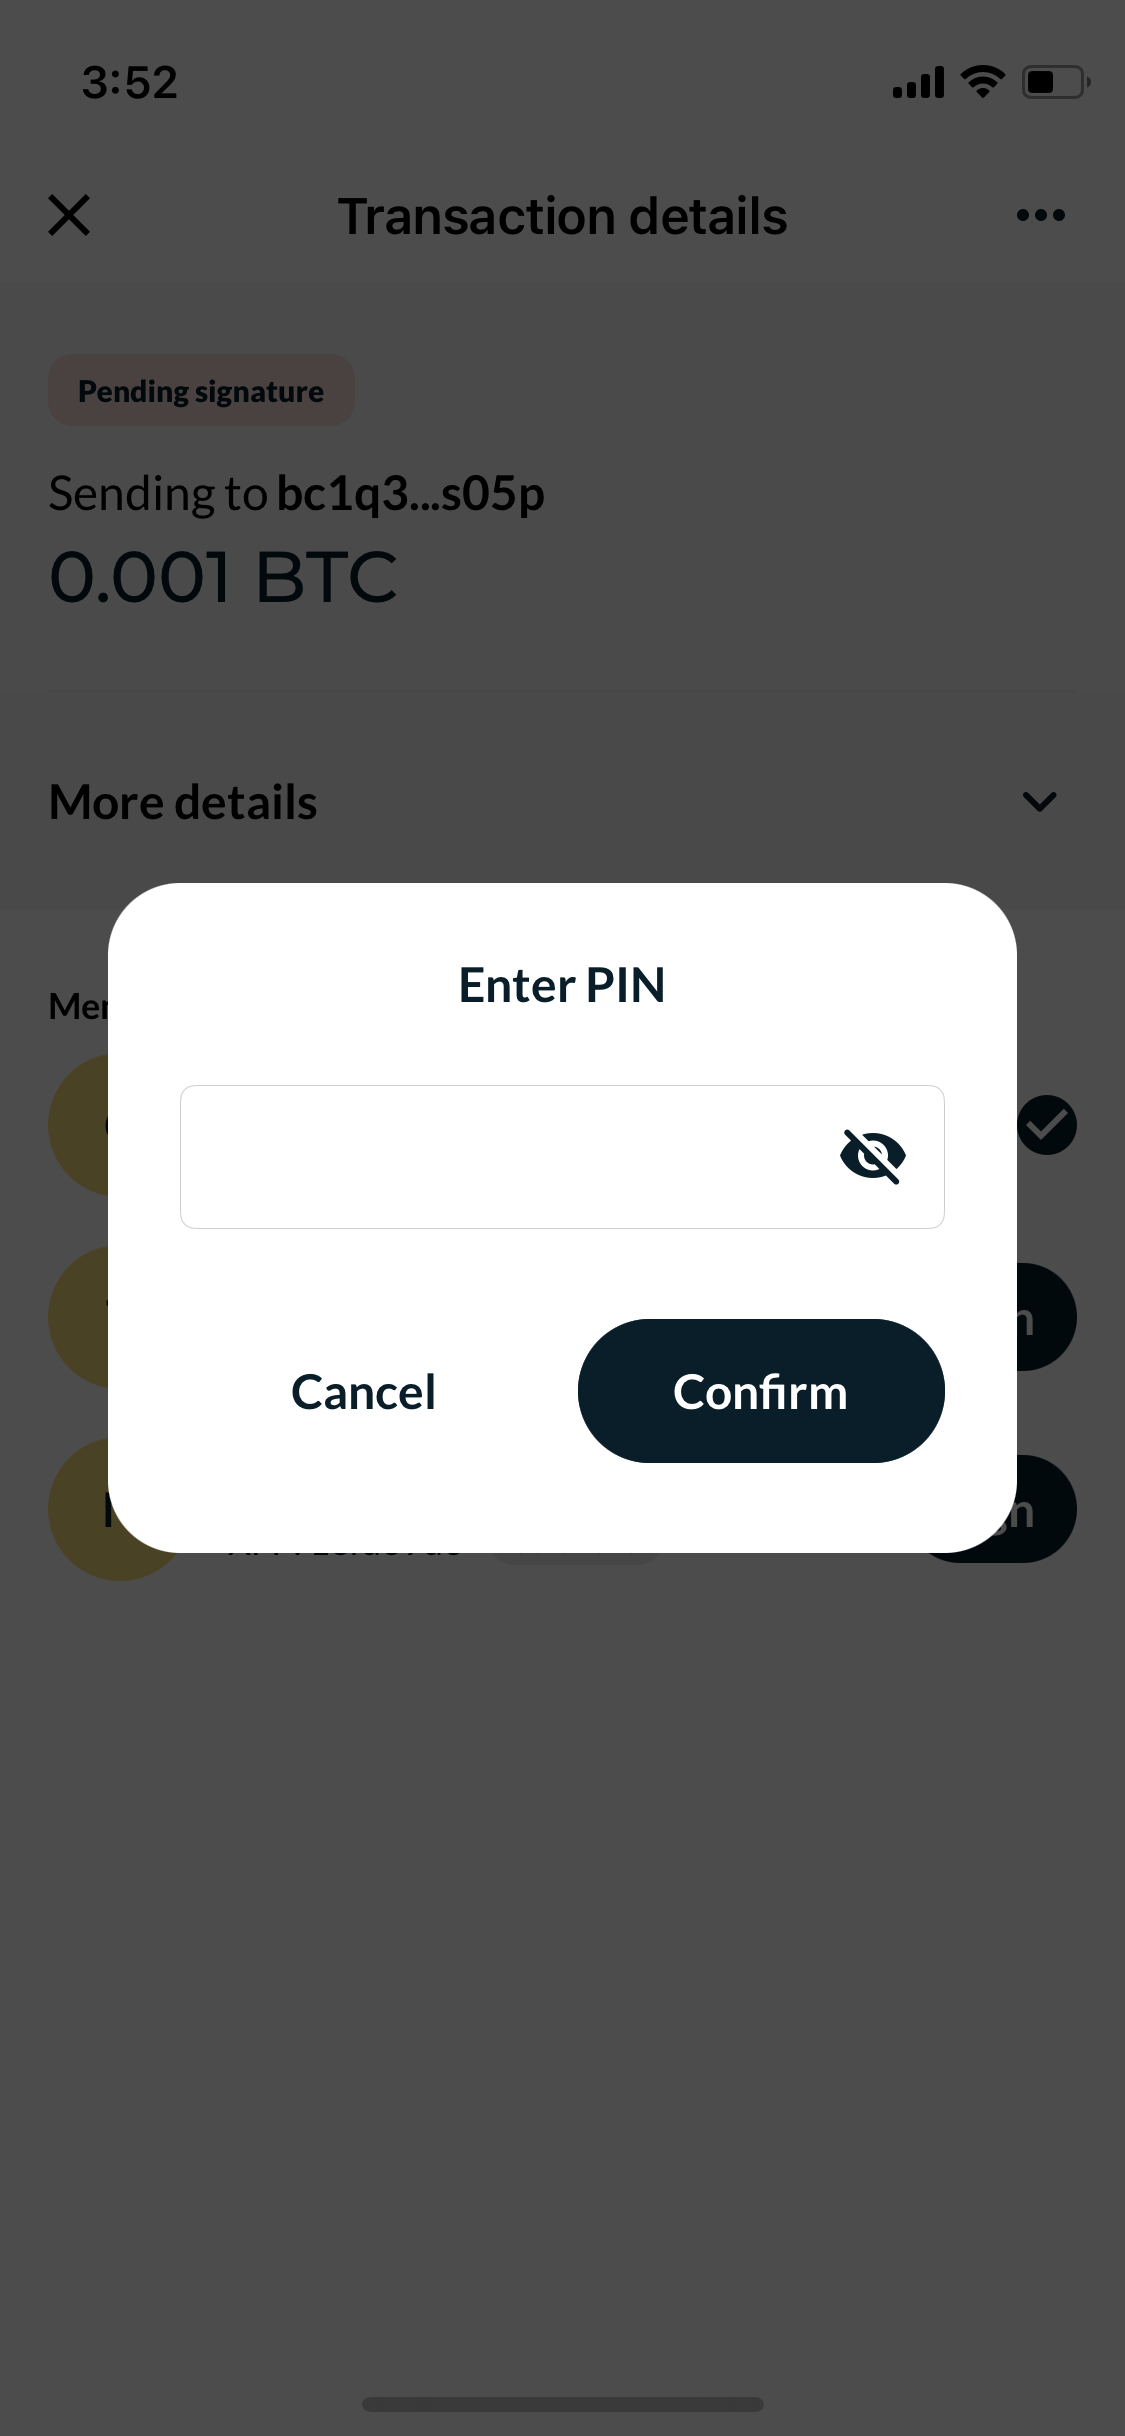 How to Setup a Secure MultiSig Wallet on iPhone with Coldcard, Tapsigner, and Nunchuk